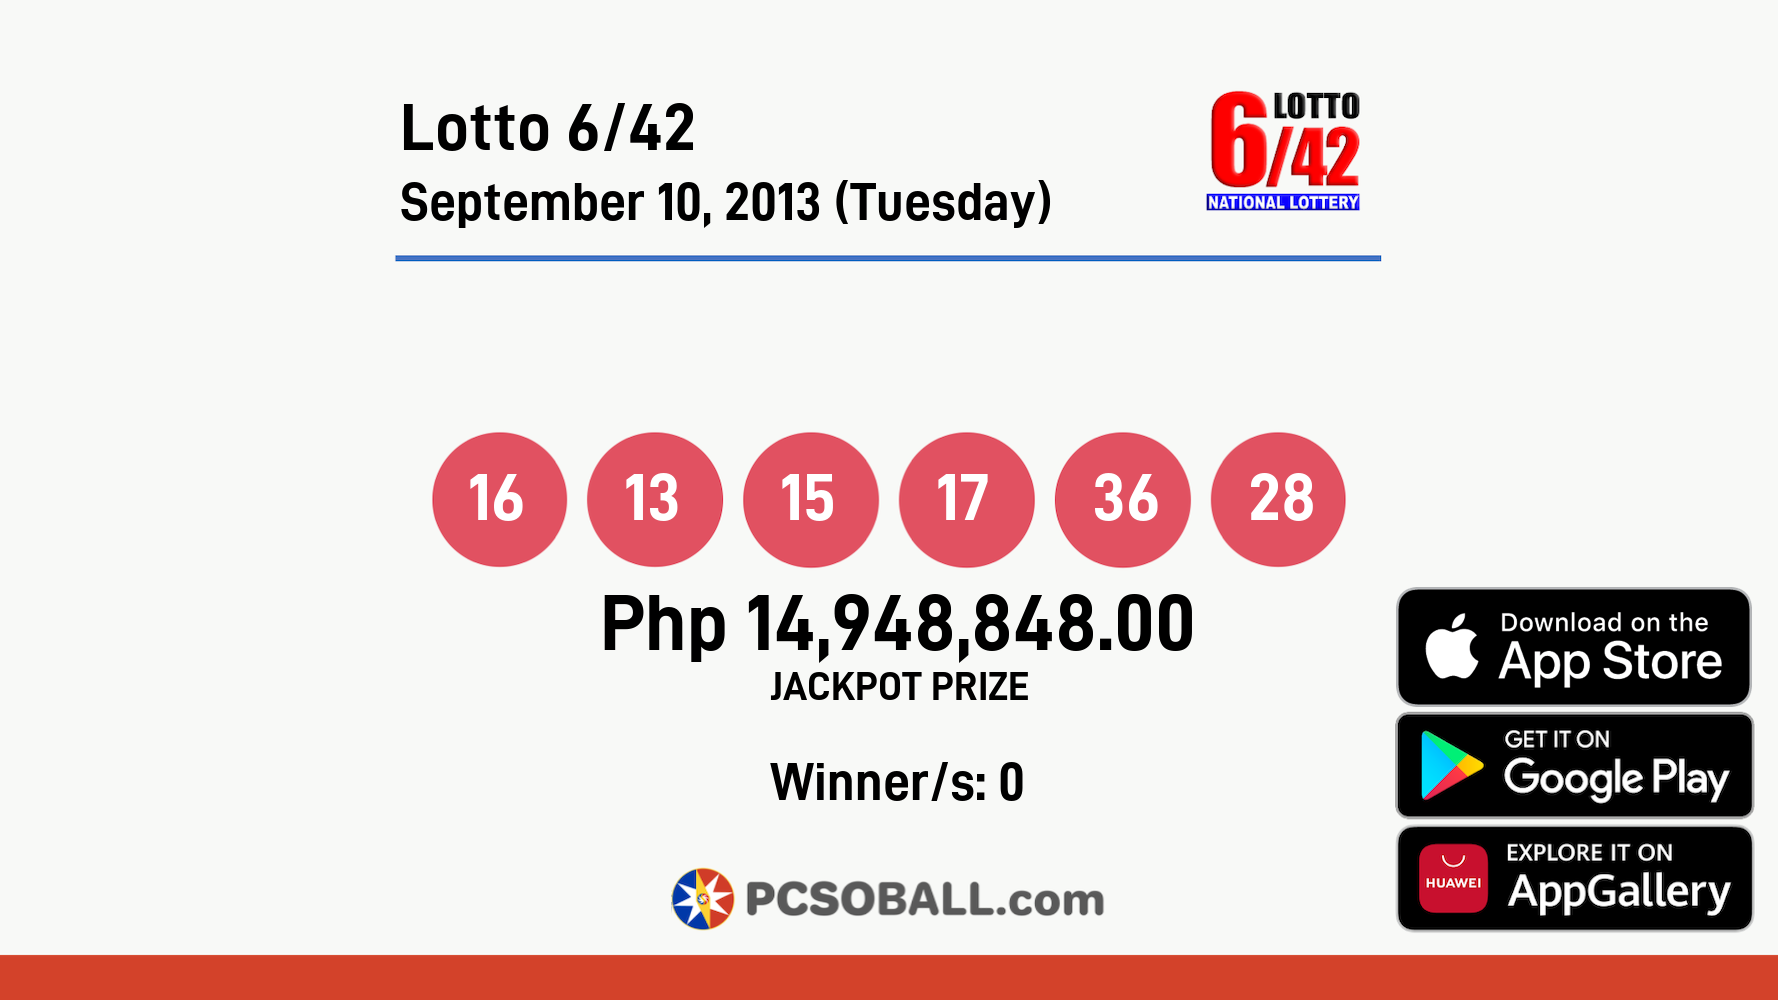 Lotto 6/42 September 10, 2013 (Tuesday) Result